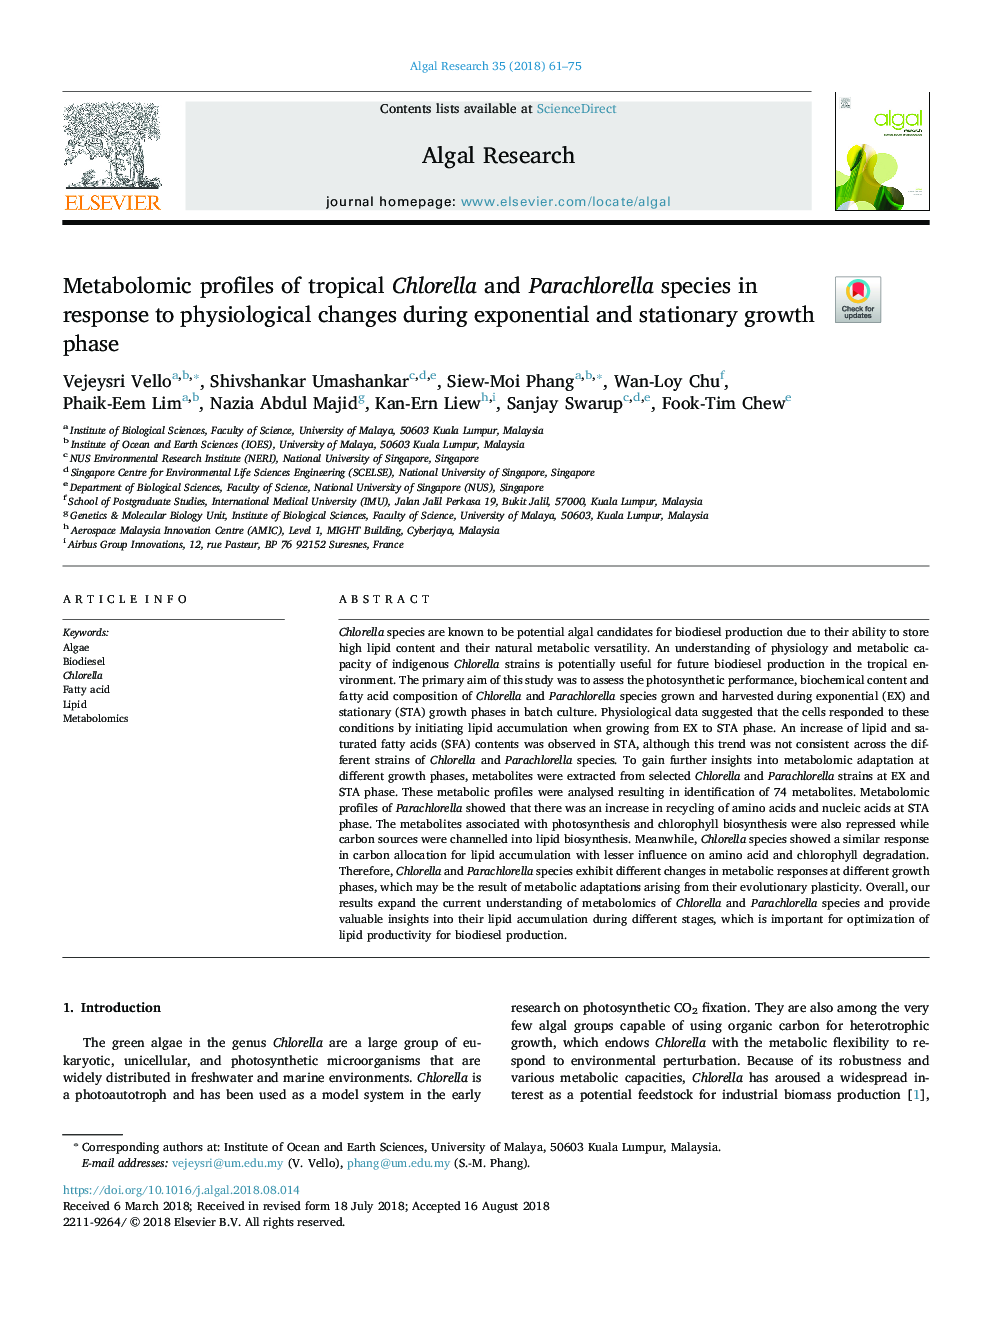 Metabolomic profiles of tropical Chlorella and Parachlorella species in response to physiological changes during exponential and stationary growth phase